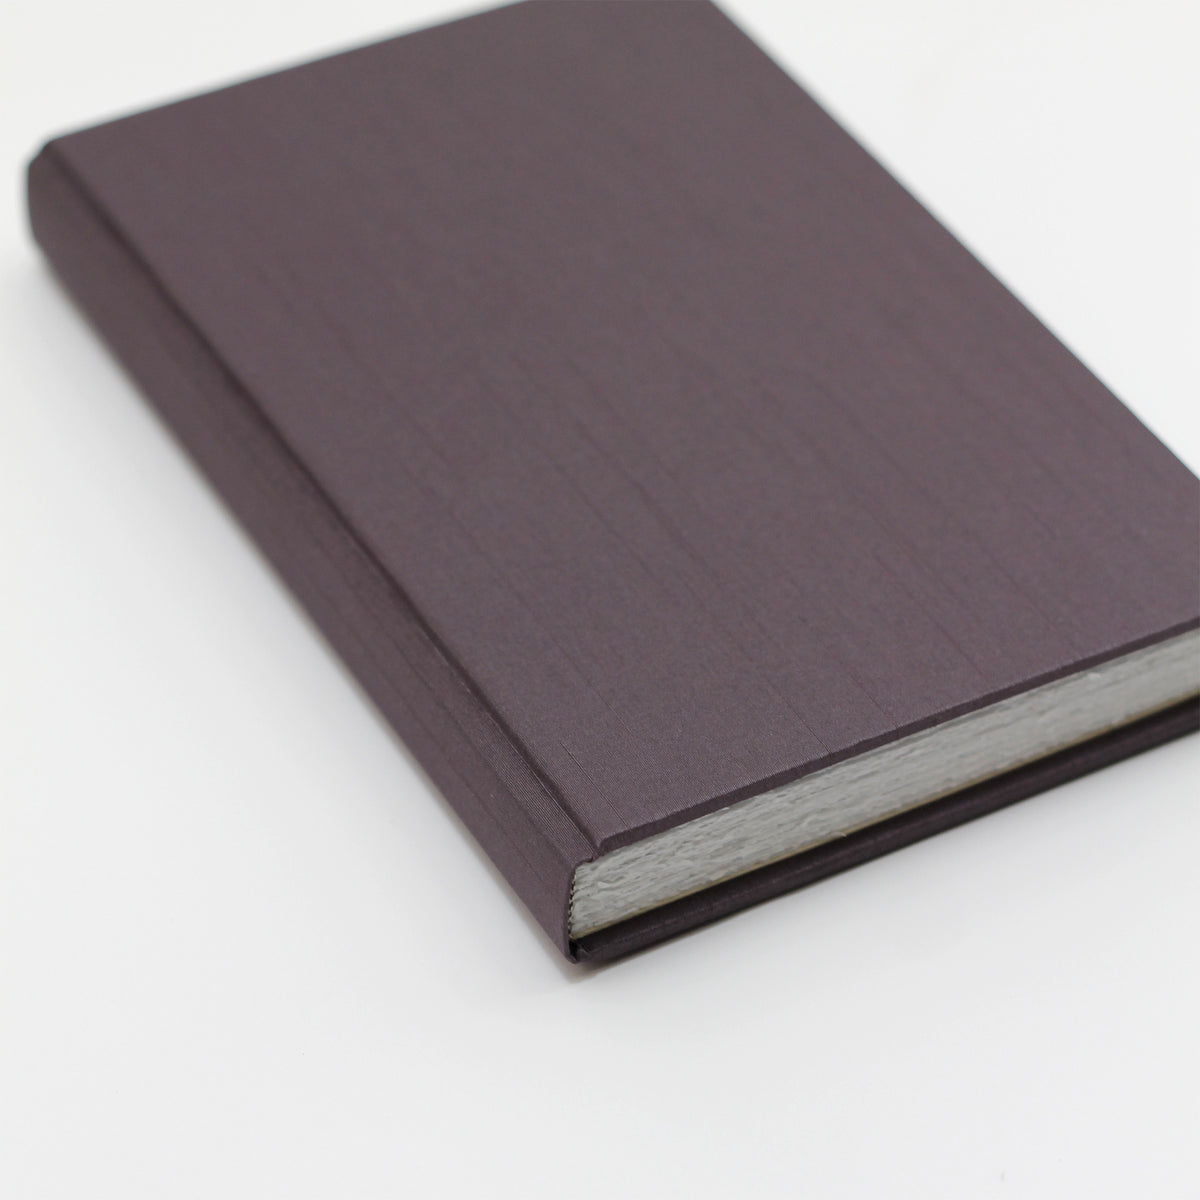 Medium 5.5x8.5 Blank Page Journal | Cover: Amethyst Silk | Available Personalized